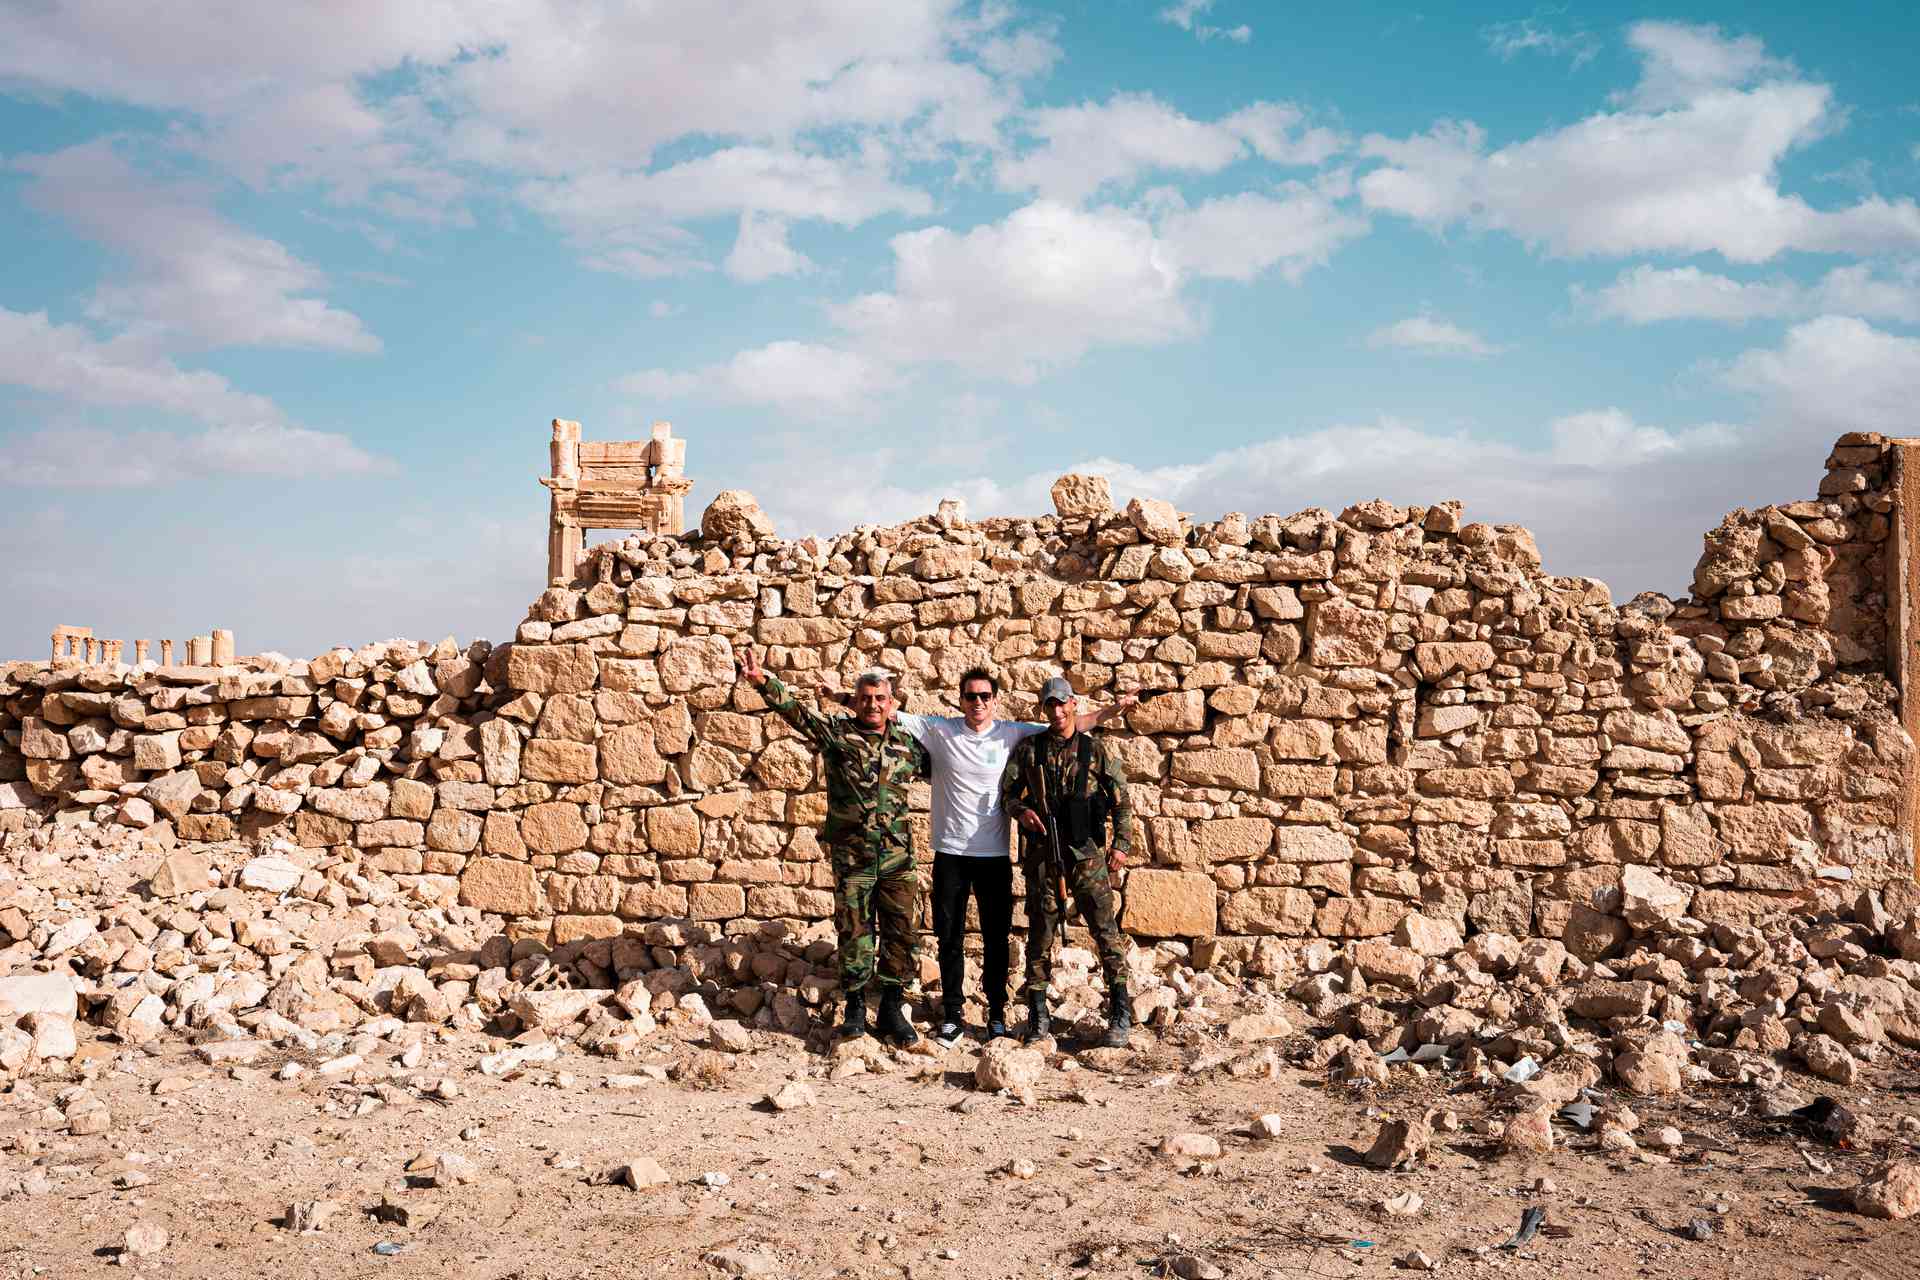 David Simpson and local soldiers standing at ruins in Palmyra, Syria. The ruined ruins of Palmyra